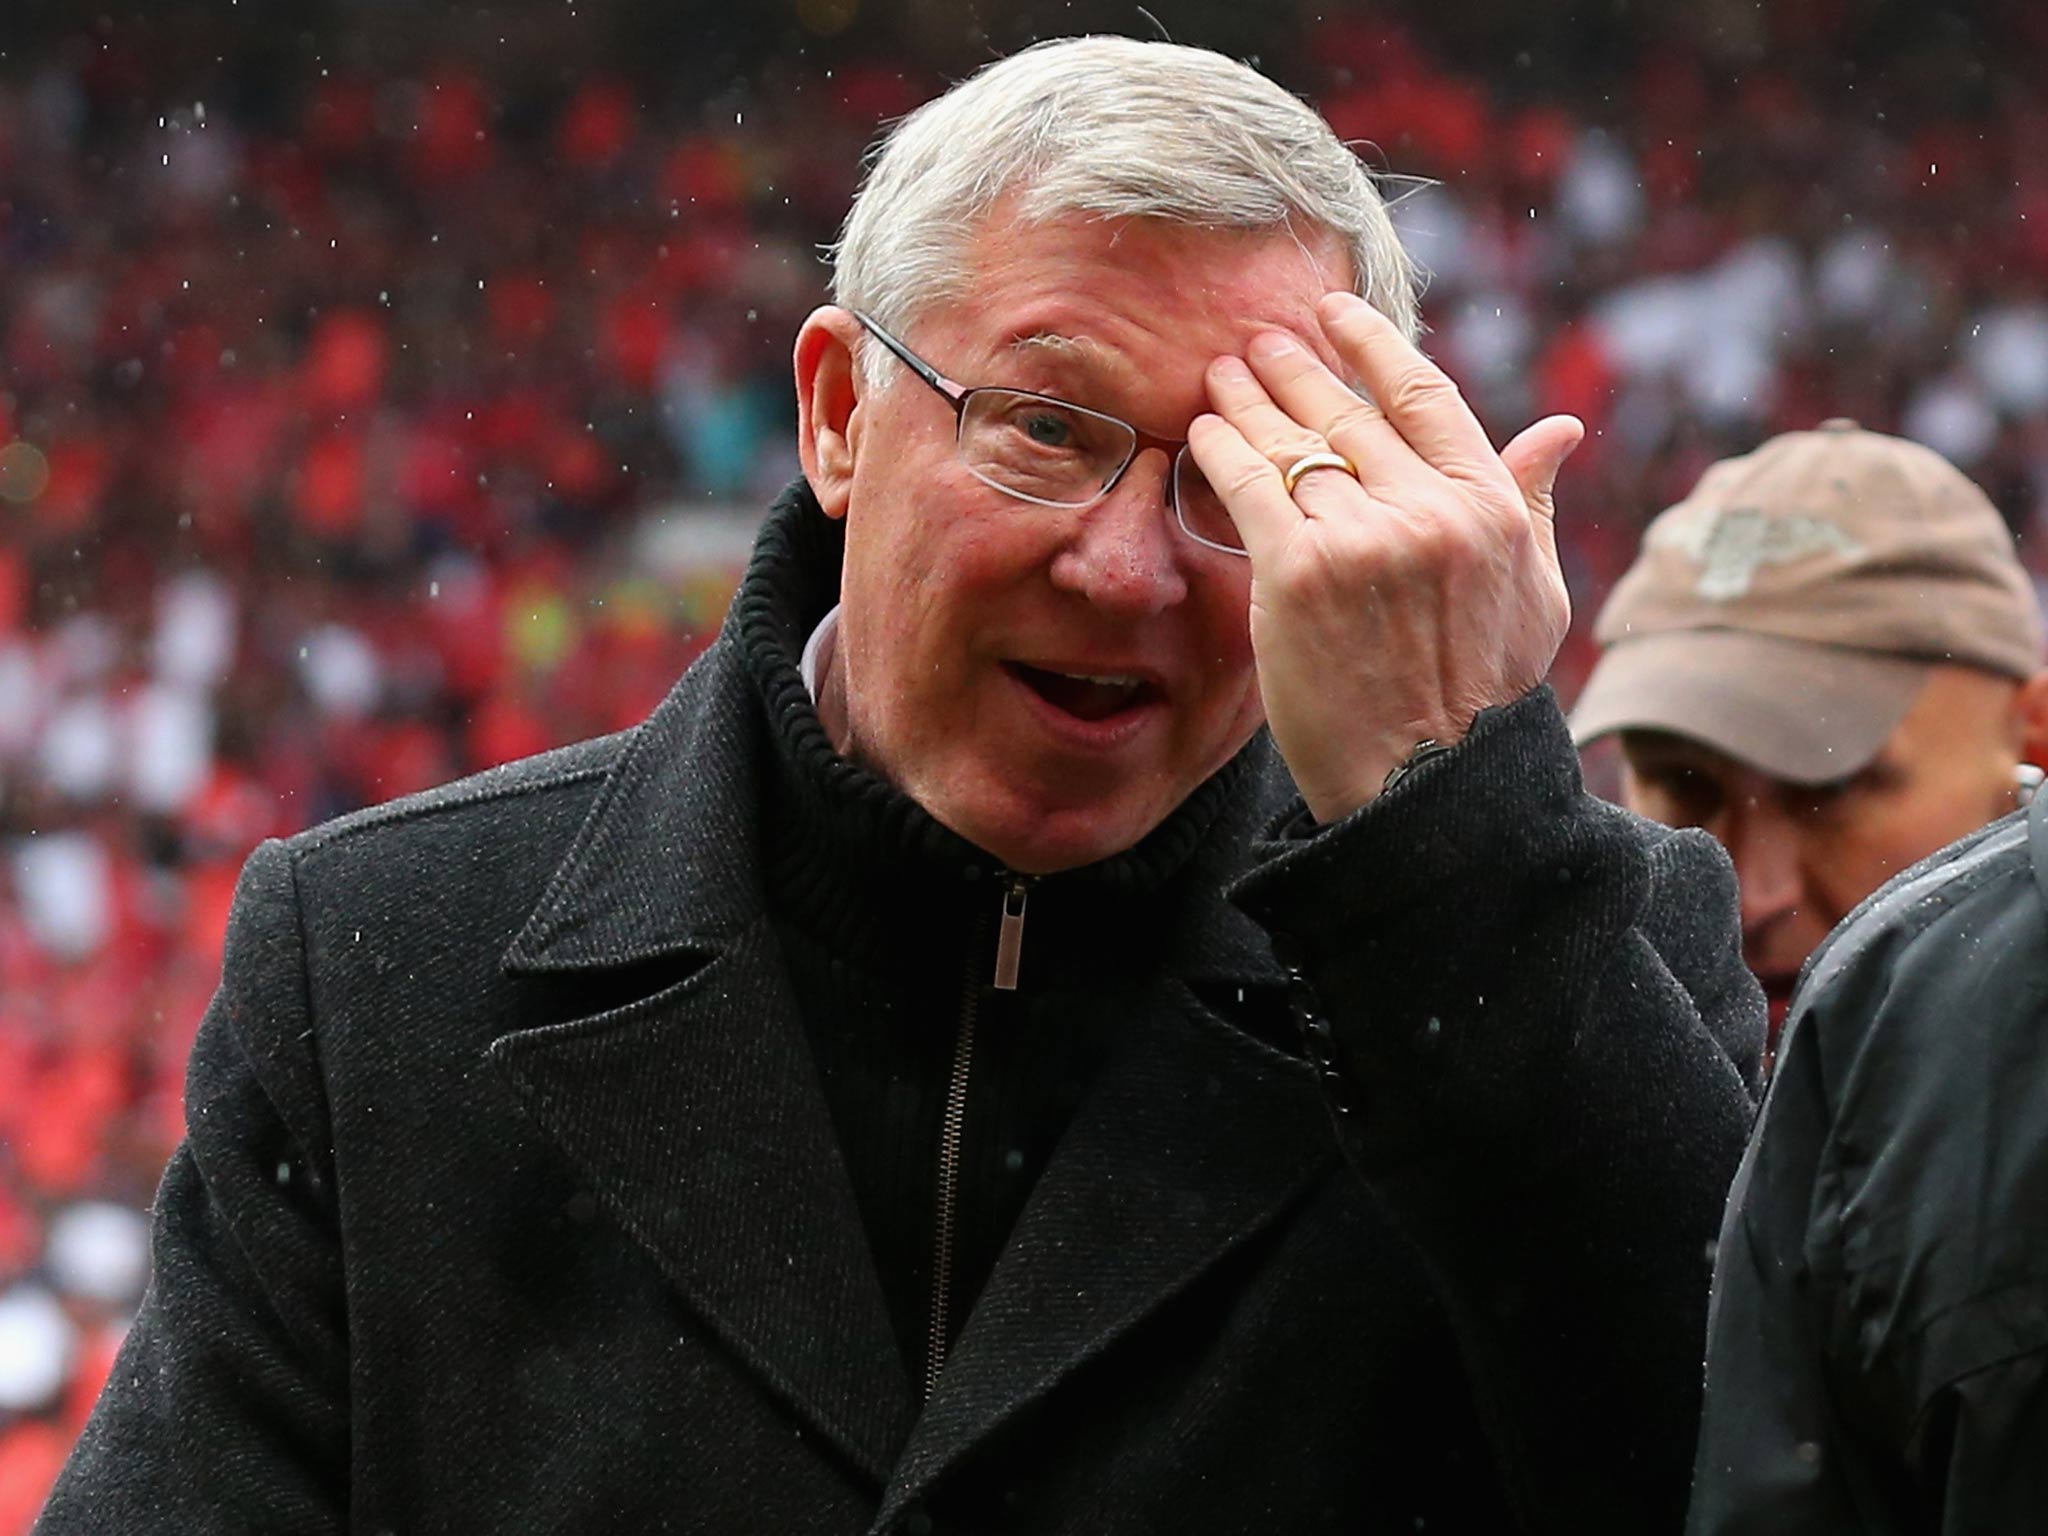 Sir Alex Ferguson breathes a sigh of relief as his side beat Swansea 2-1 in his final game at Old Trafford